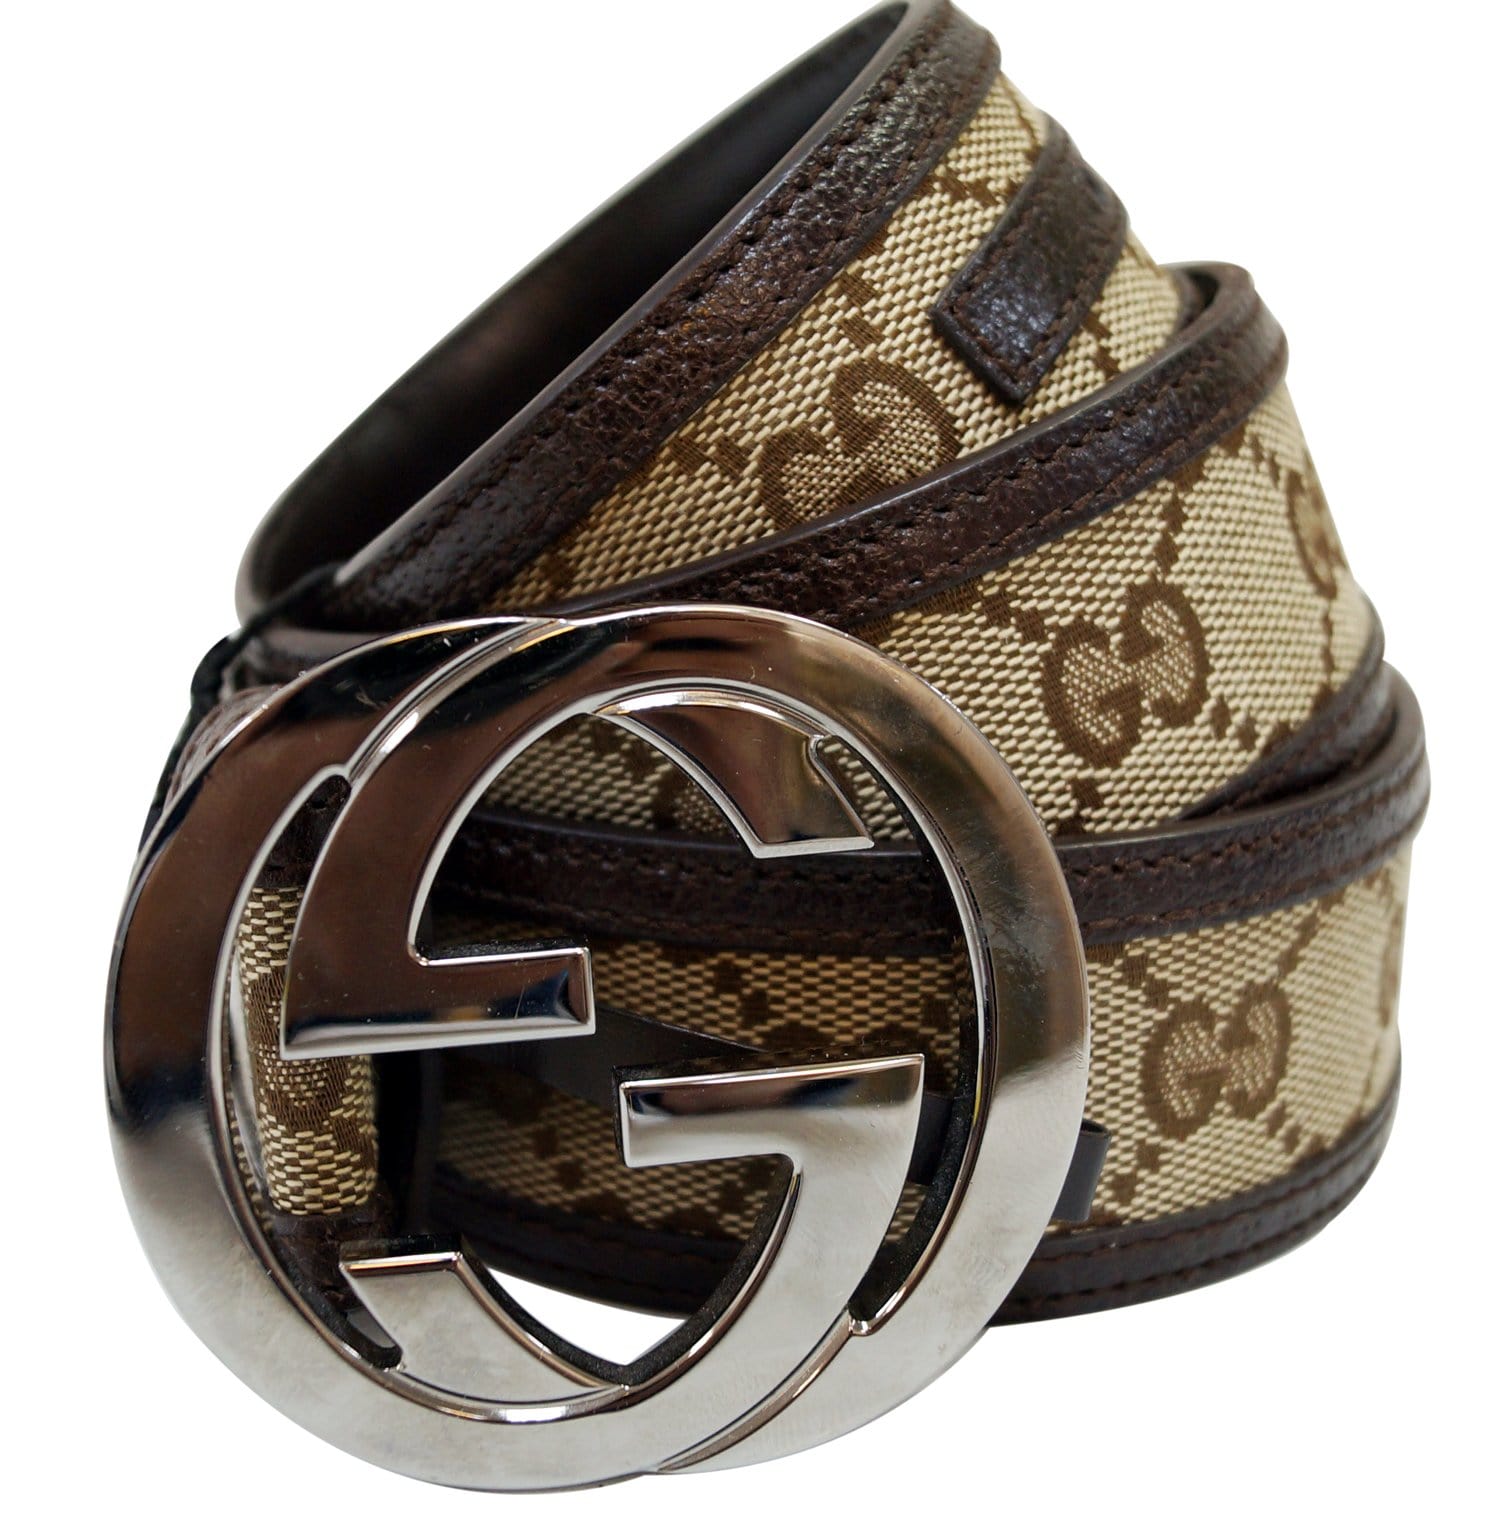 MEN GUCCI GG LEATHER BELT WITH DOUBLE G BUCKLE SILVER DARK BROWN NEW 30-32